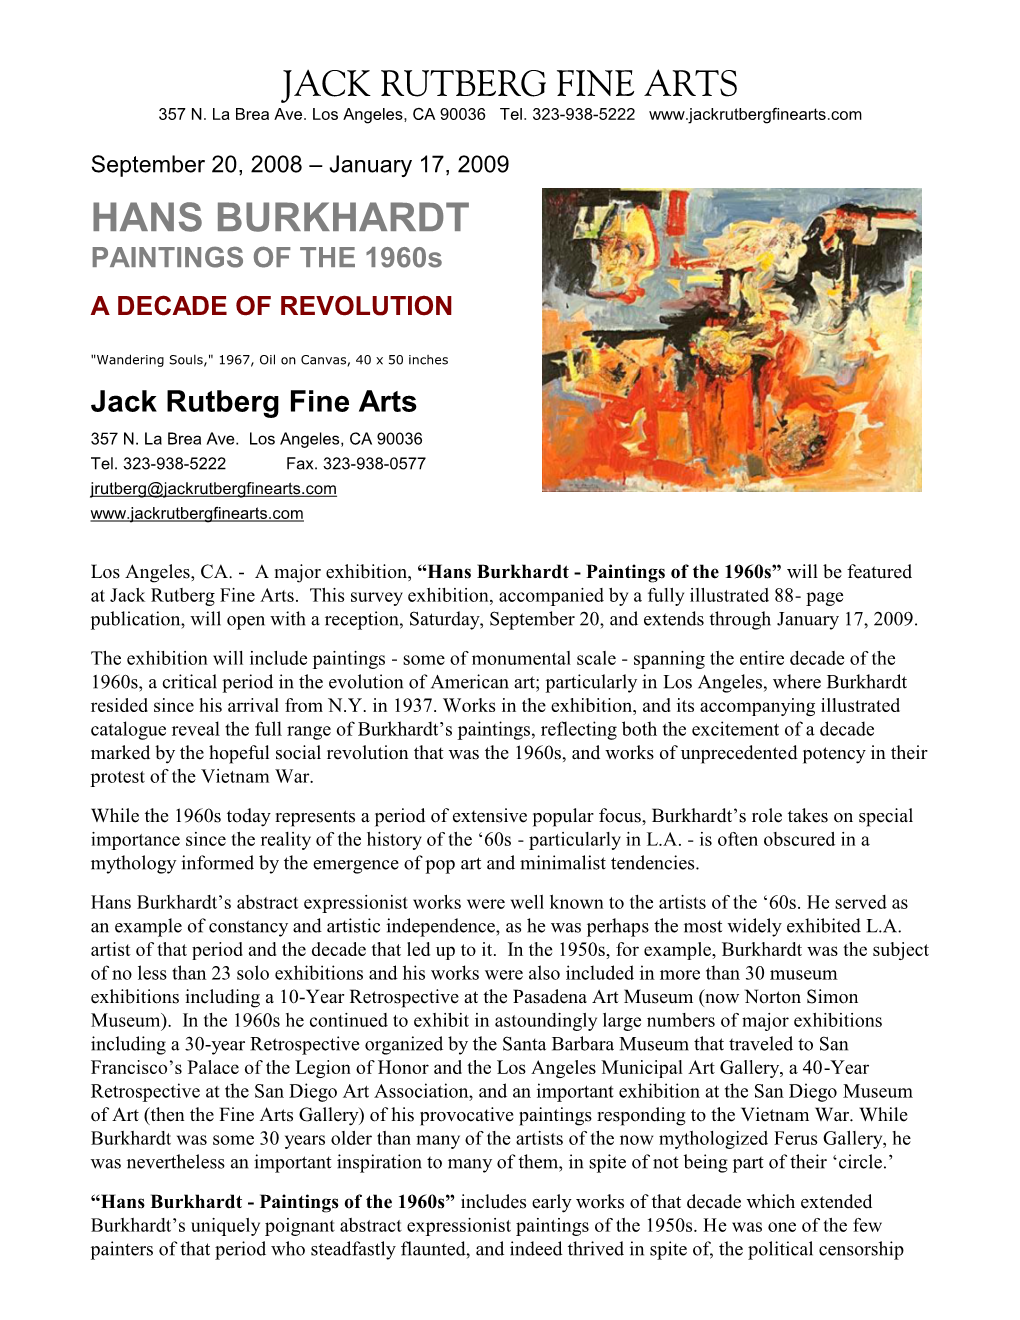 HANS BURKHARDT PAINTINGS of the 1960S a DECADE of REVOLUTION